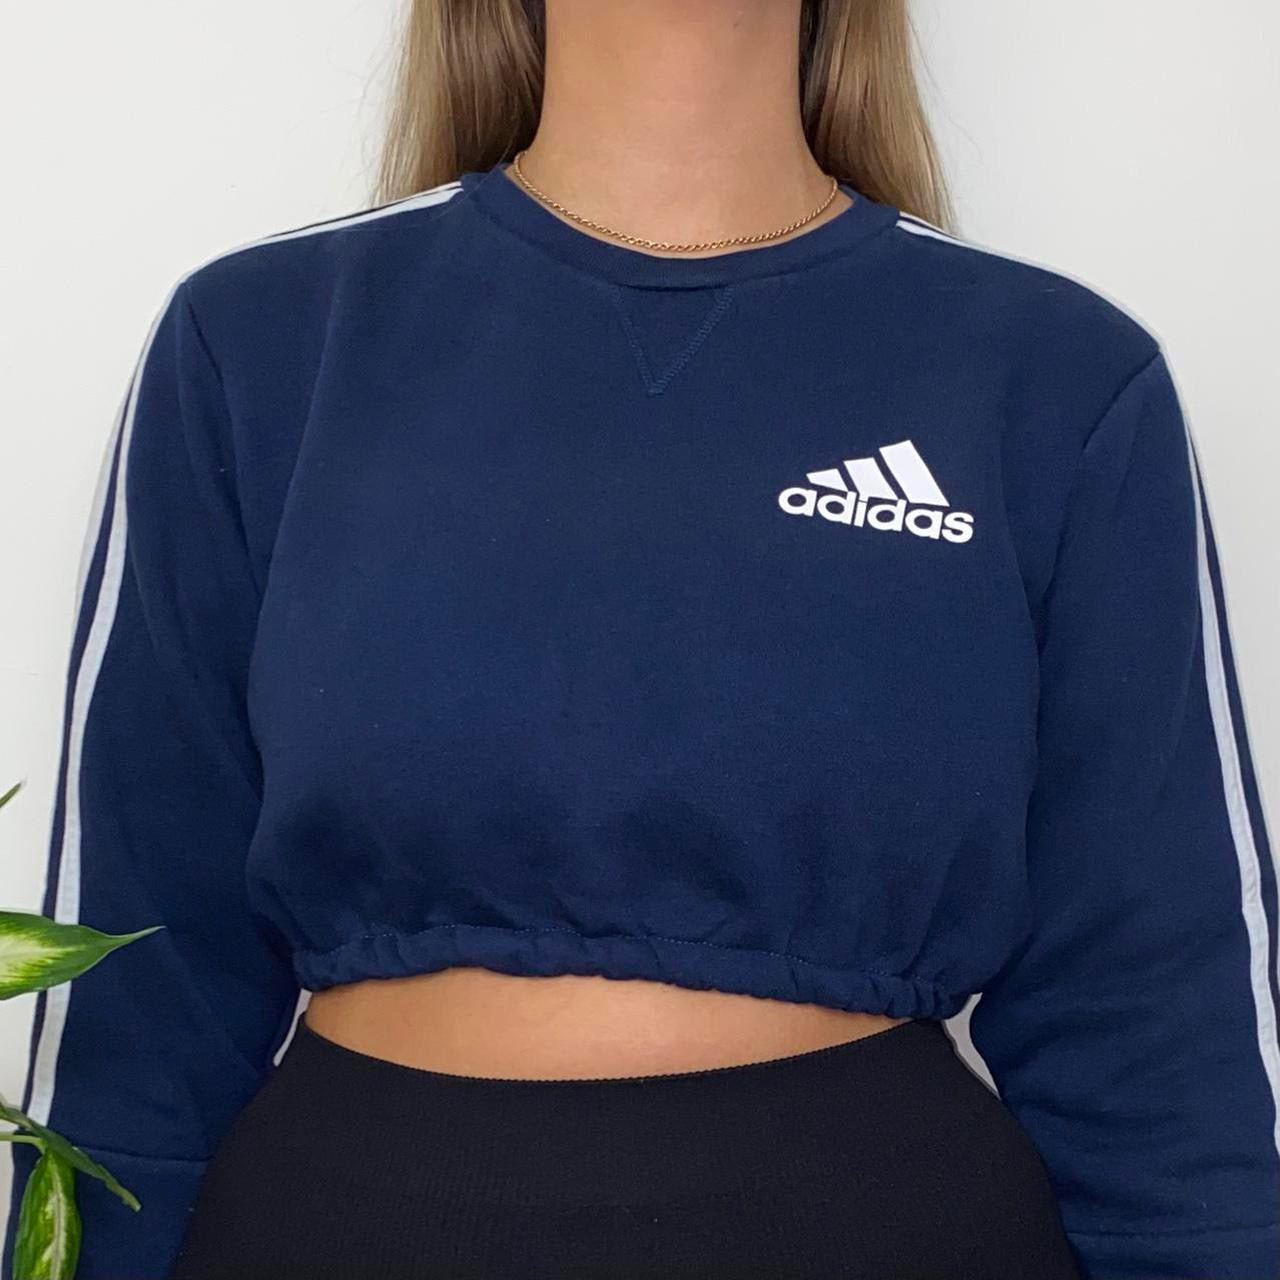 close up of navy sweatshirt with small adidas text and symbol logo on chest with white 3 stripes on arms shown on model